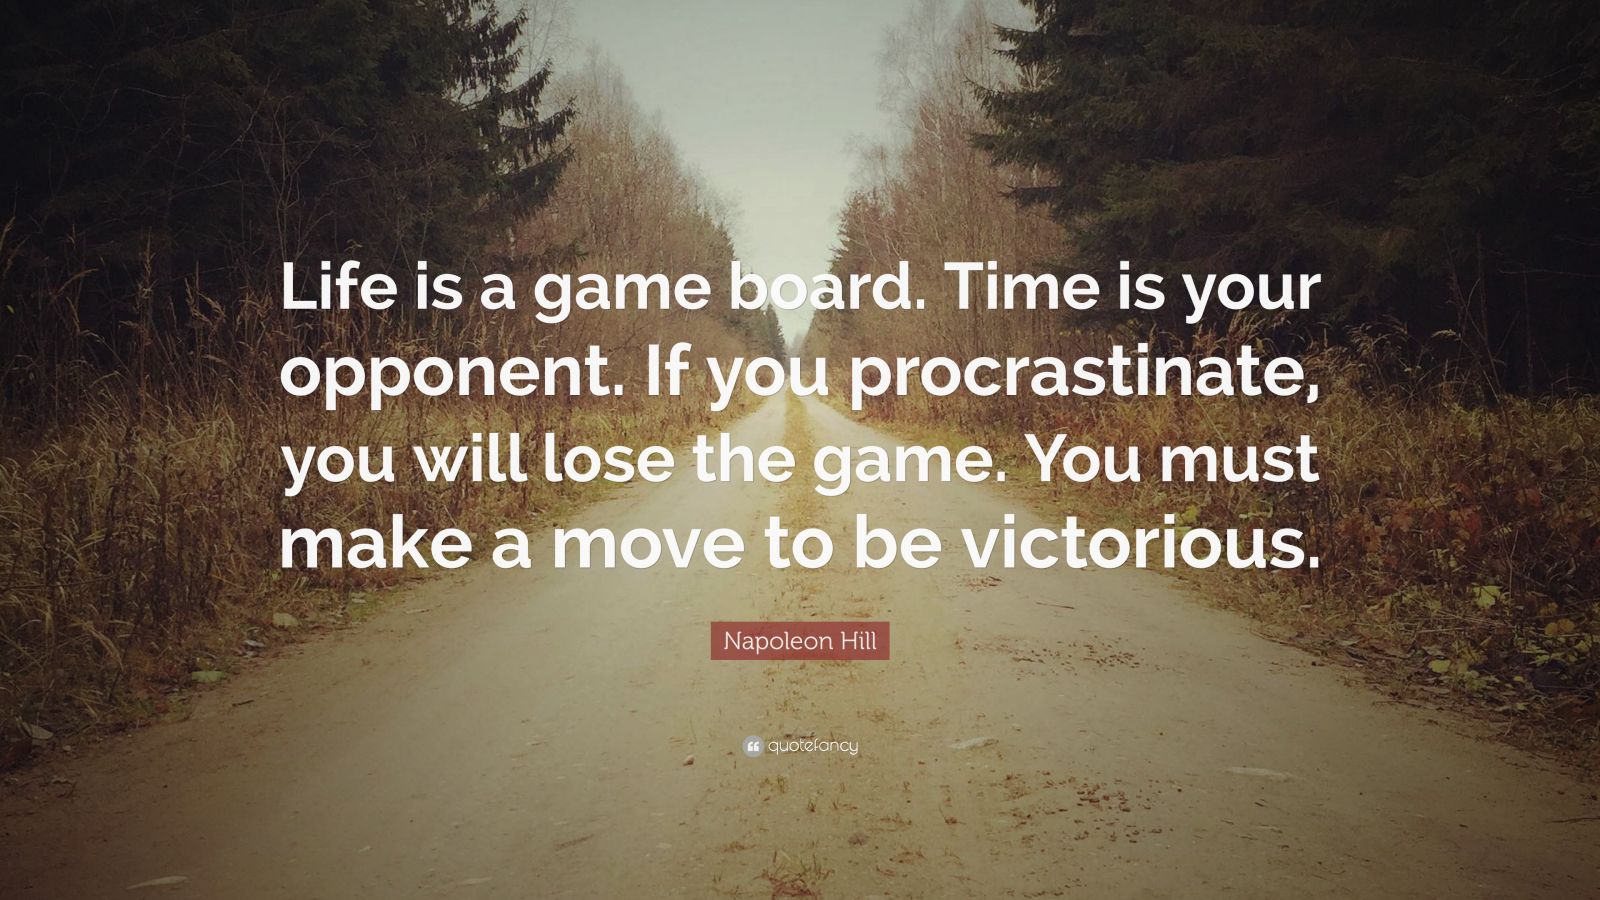 4685601 Napoleon Hill Quote Life Is A Game Board Time Is Your Opponent If 